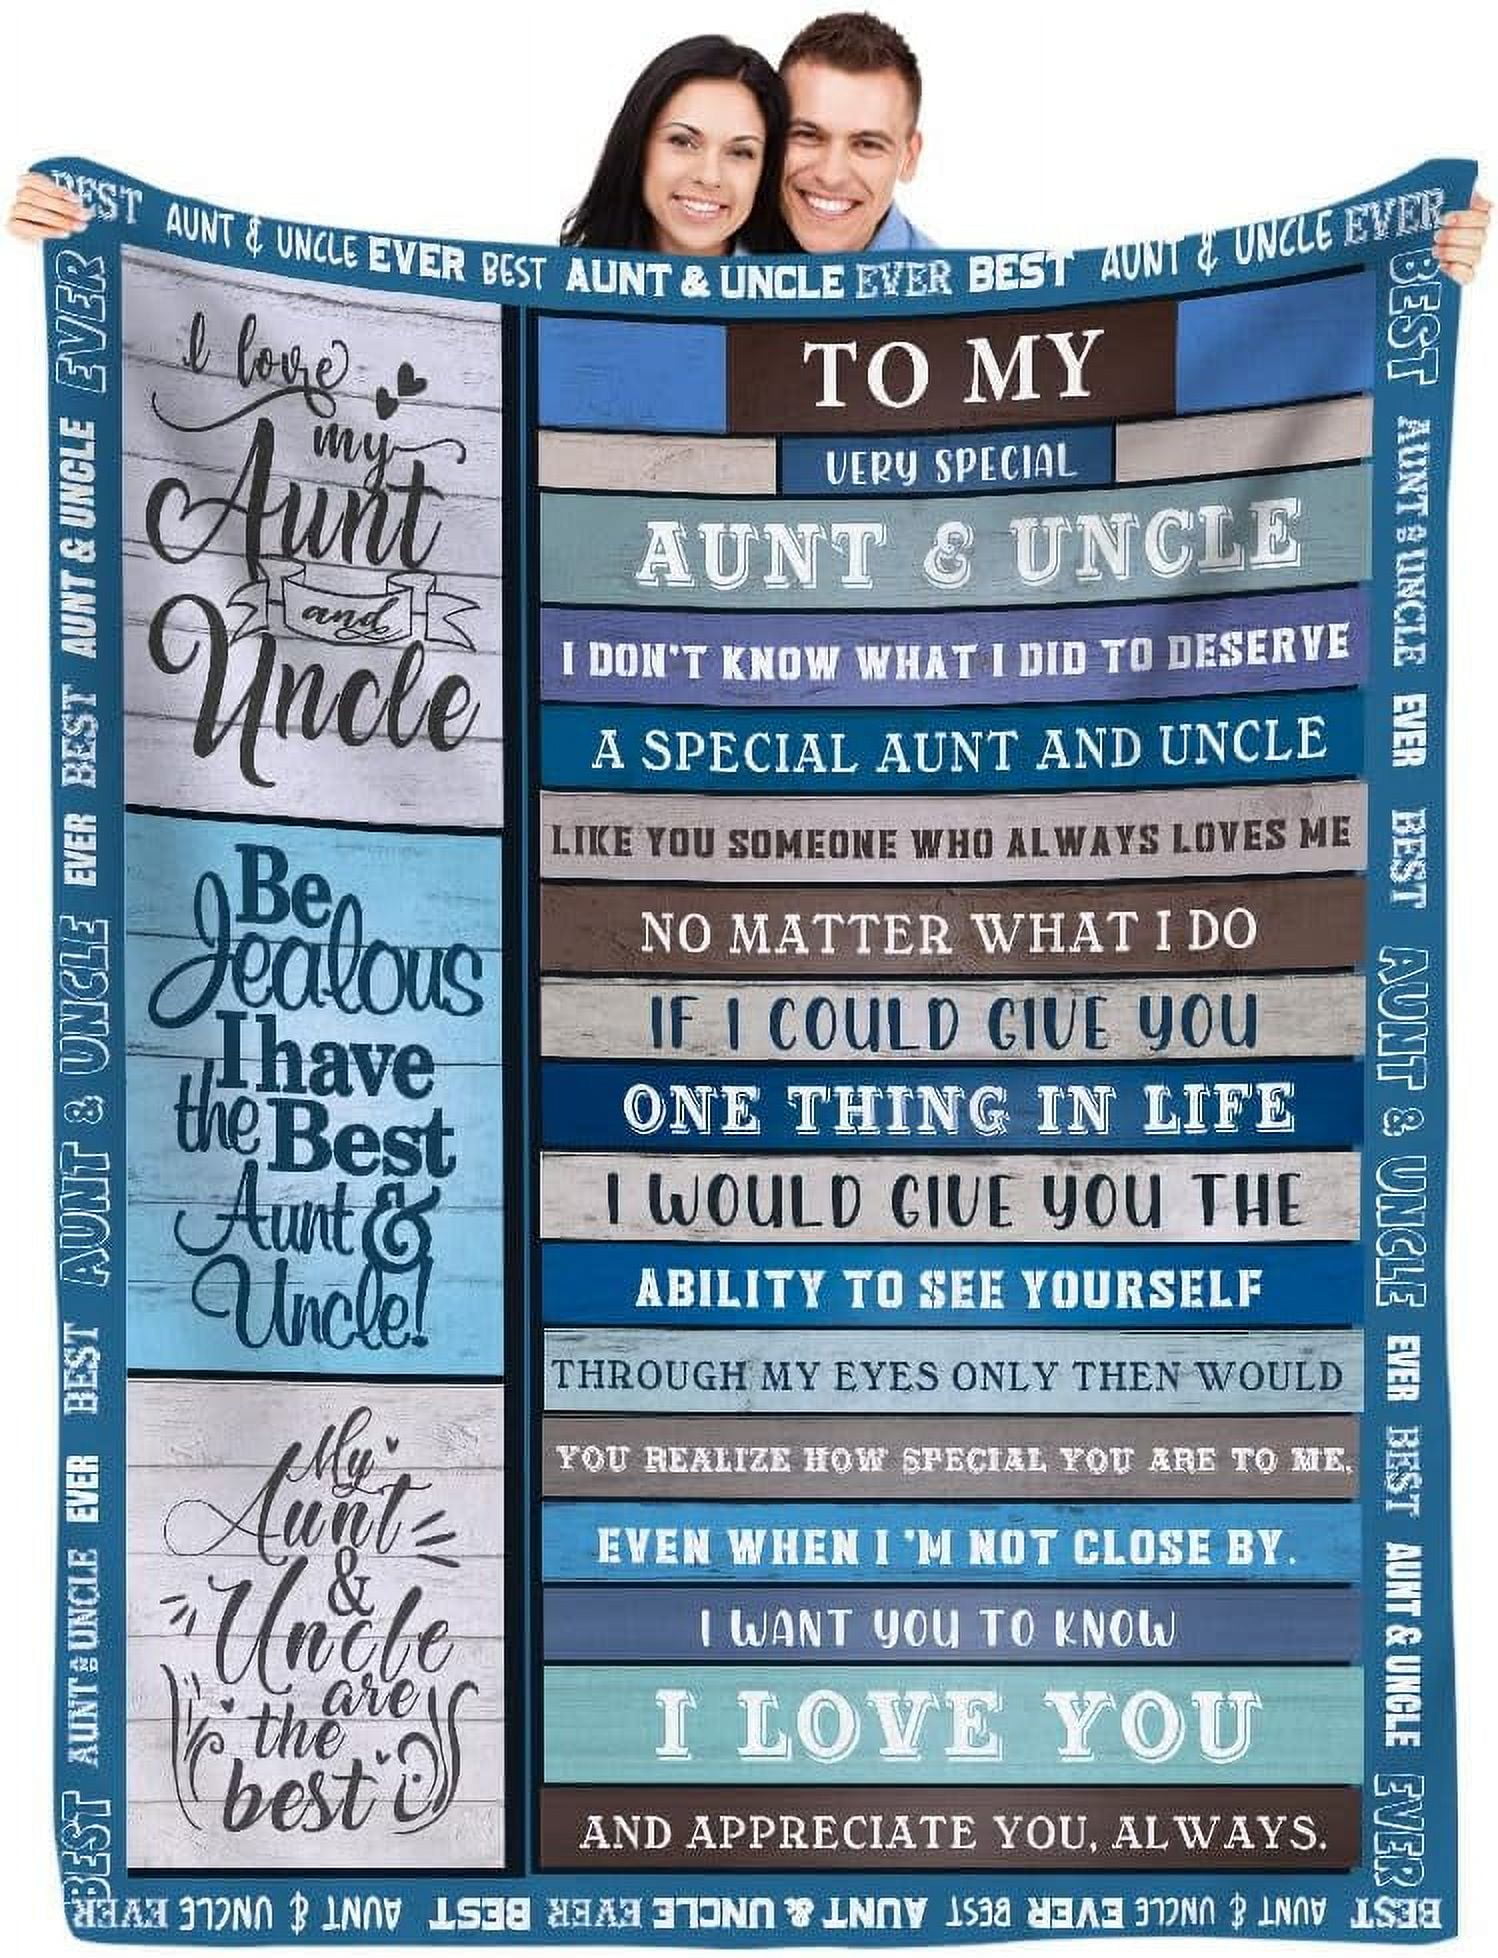 Gifts Aunt Uncle Niece Nephew Best Blanket Many Great Words Thanksgiving Christmas Anniversary Presents Throw 50 X 60 4280cbdb 542f 4c42 b56f e0ed86d34ab0.6344dfee3d11704597a4cced20b20e9a